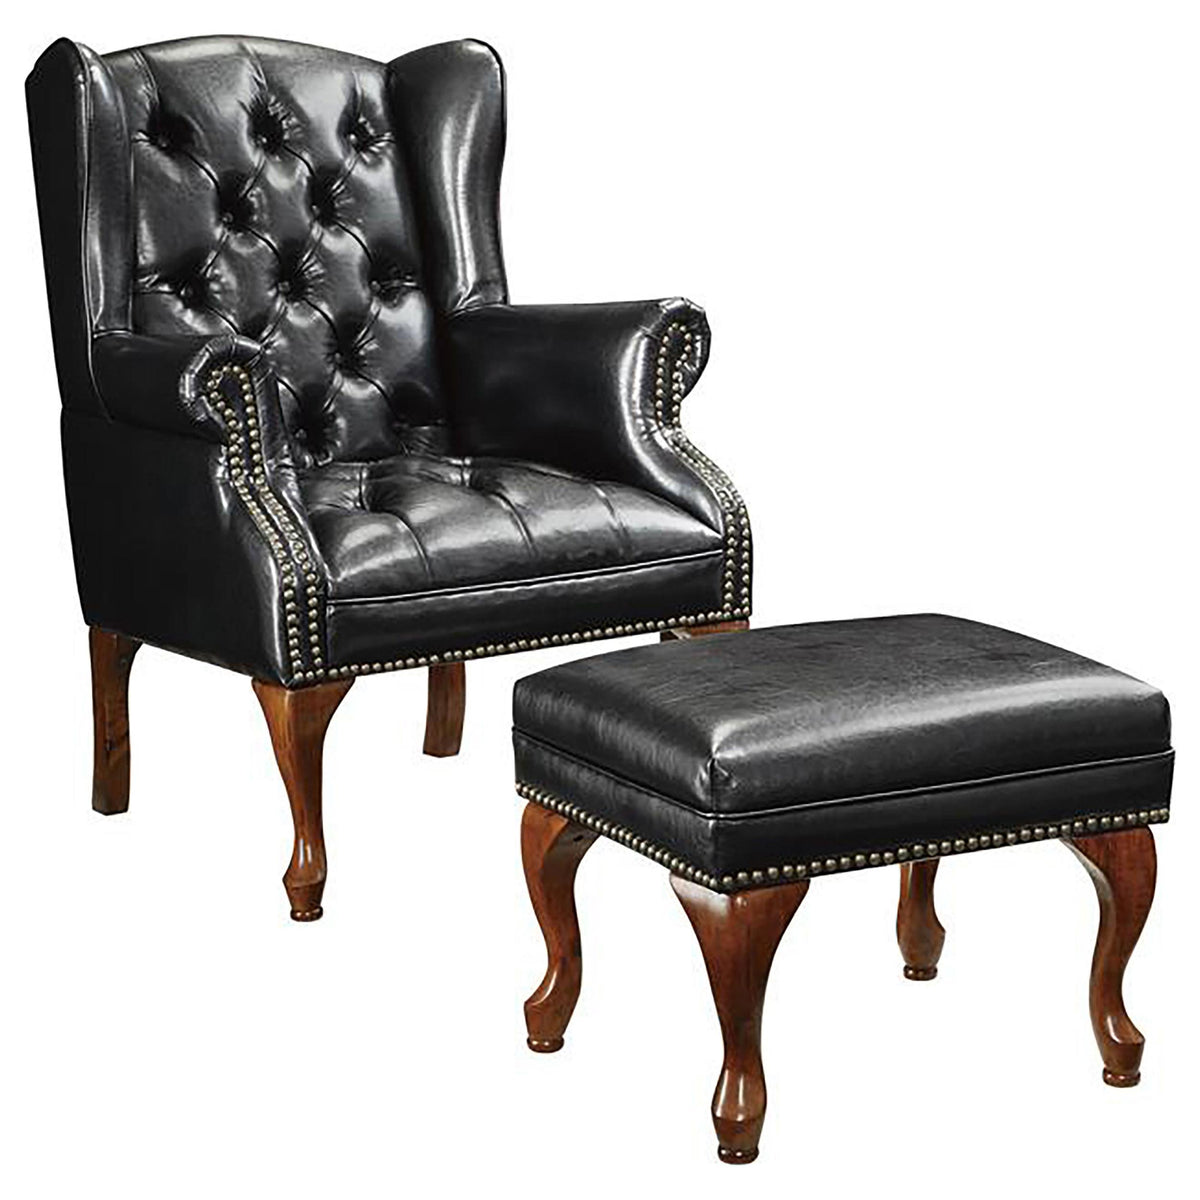 Roberts Button Tufted Back Accent Chair with Ottoman Black and Espresso Roberts Button Tufted Back Accent Chair with Ottoman Black and Espresso Half Price Furniture